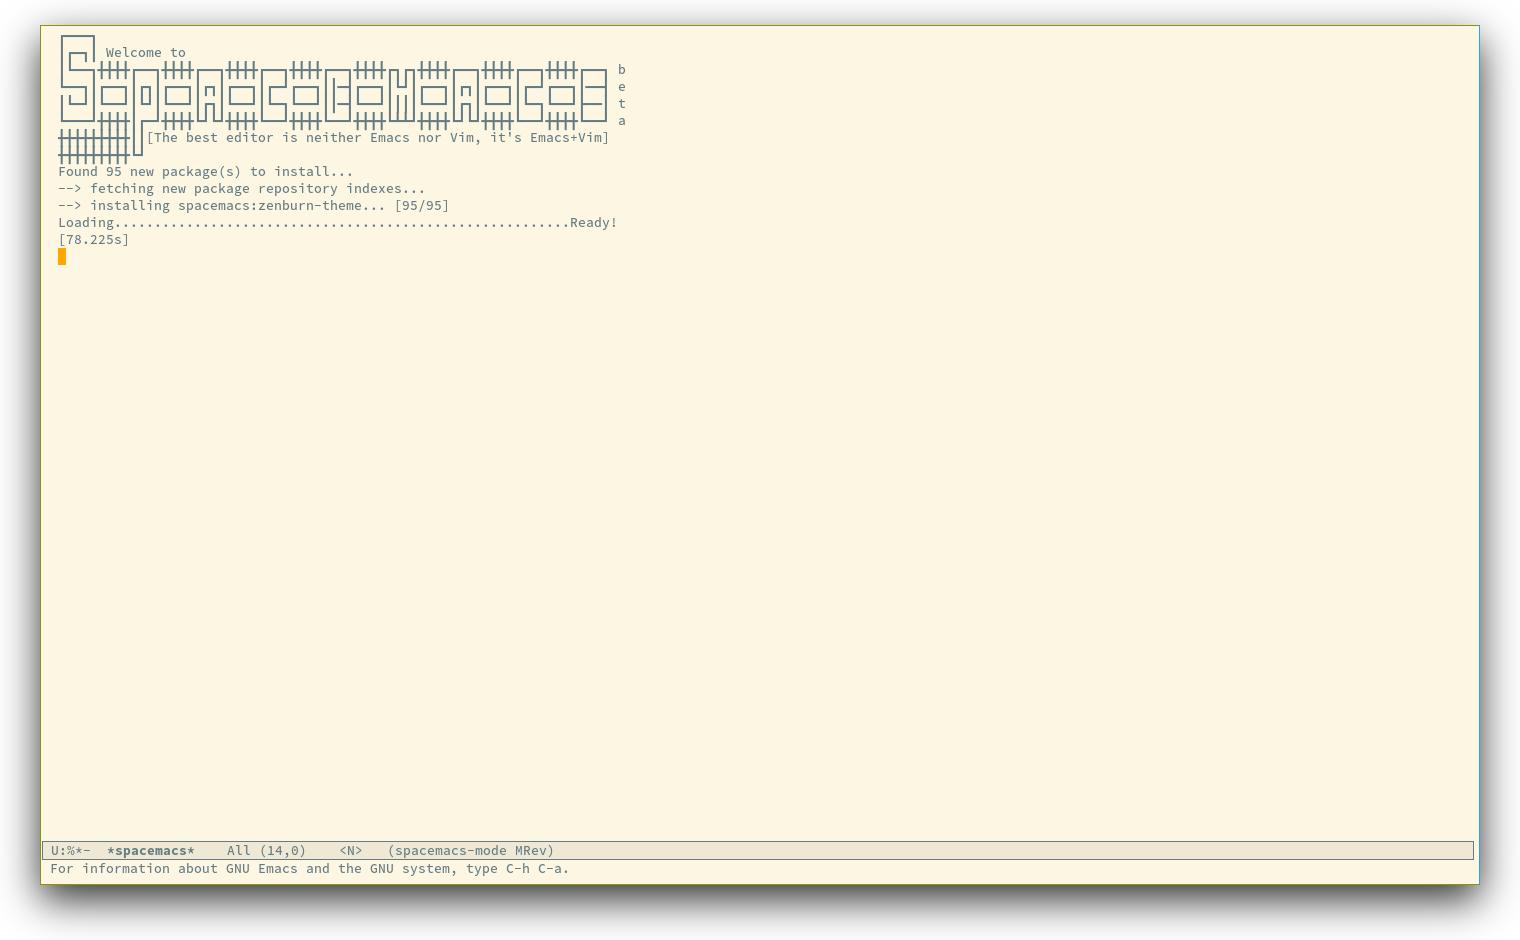 /TakeV/spacemacs/media/commit/1c61e35e93281ec0ebf48a45dc8511eef0c89d0d/doc/img/spacemacs-startup.png